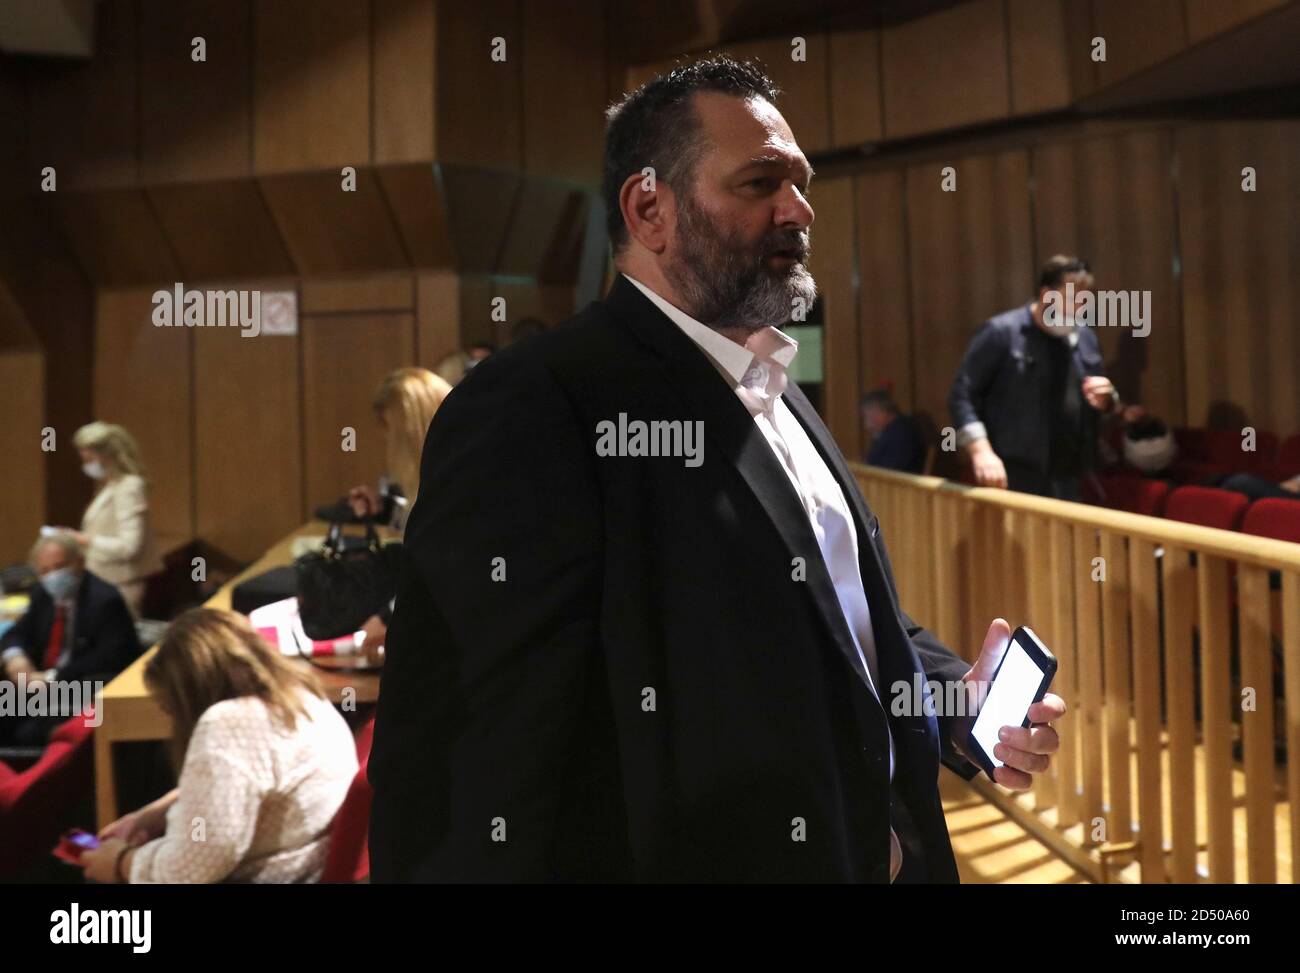 Greek Member of the European Parliament and a former member of Golden Dawn  Ioannis Lagos is seen during a break as he attends the trial of leaders and  members of the Golden